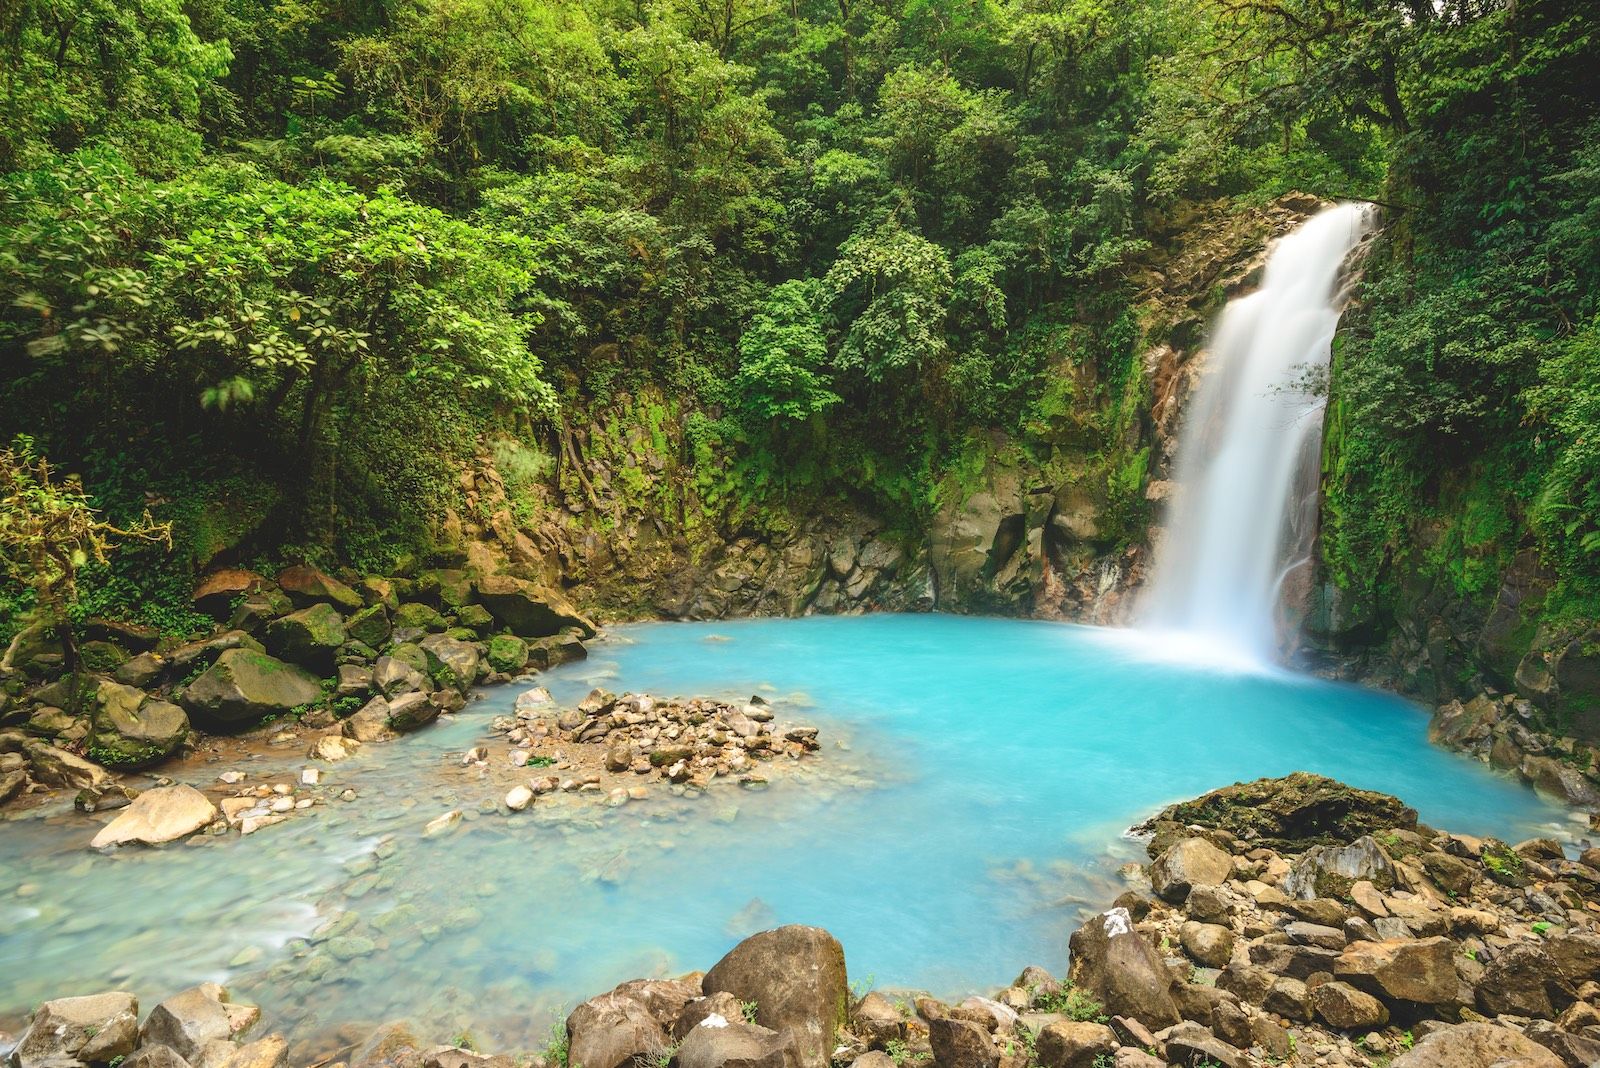 15 amazing experiences to have in Costa Rica before you die